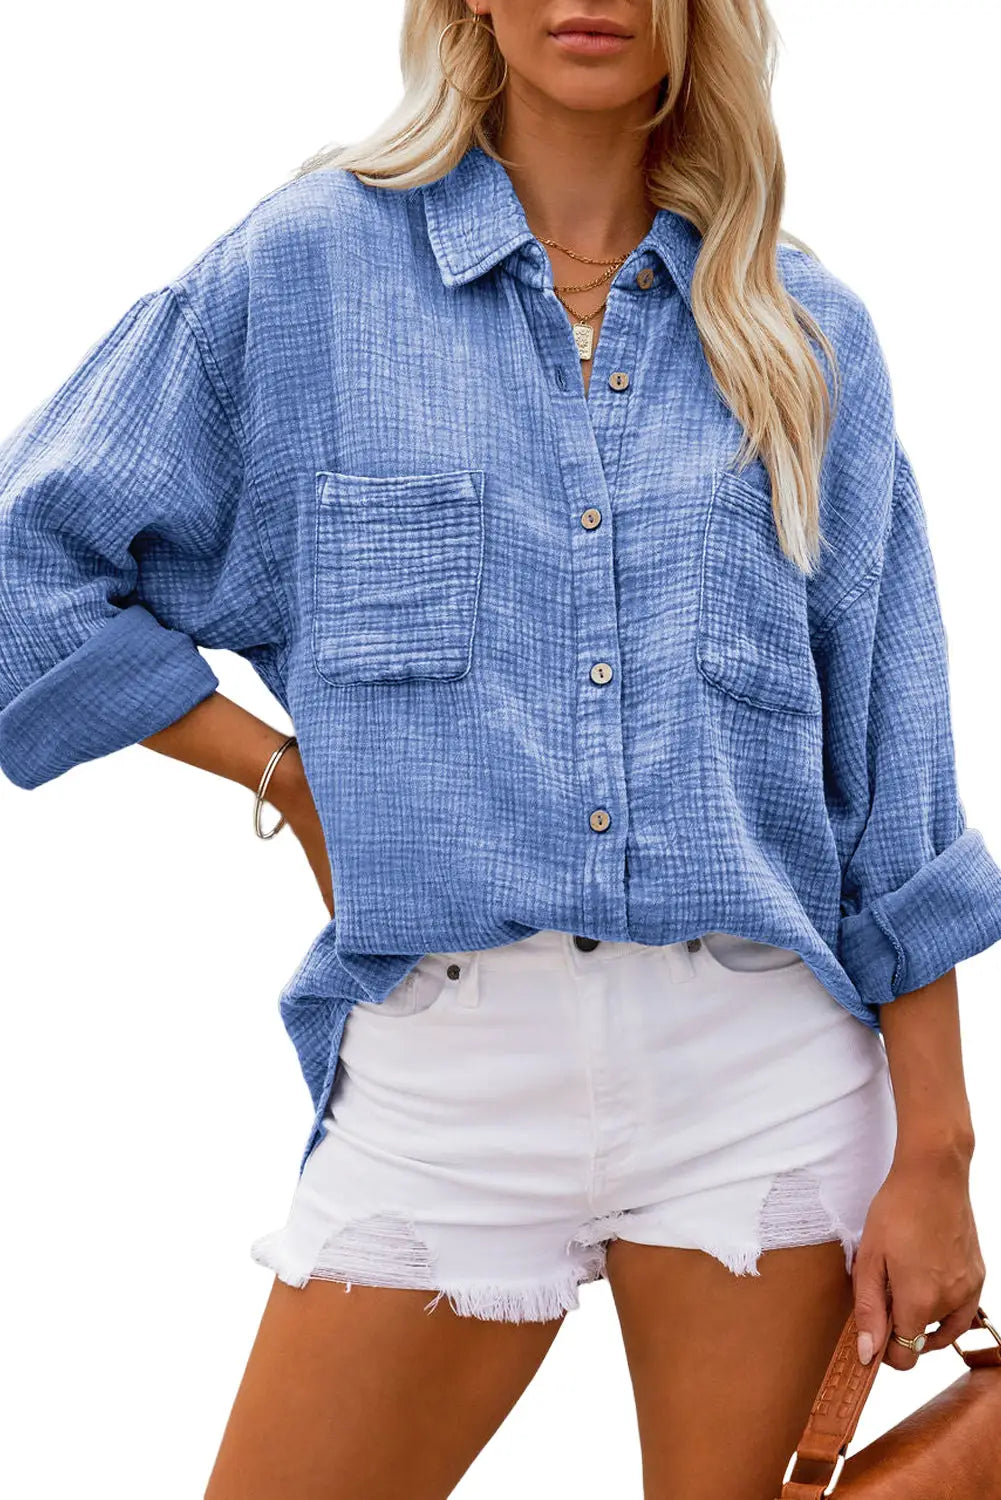 Sky blue mineral wash crinkle textured chest pockets shirt - tops